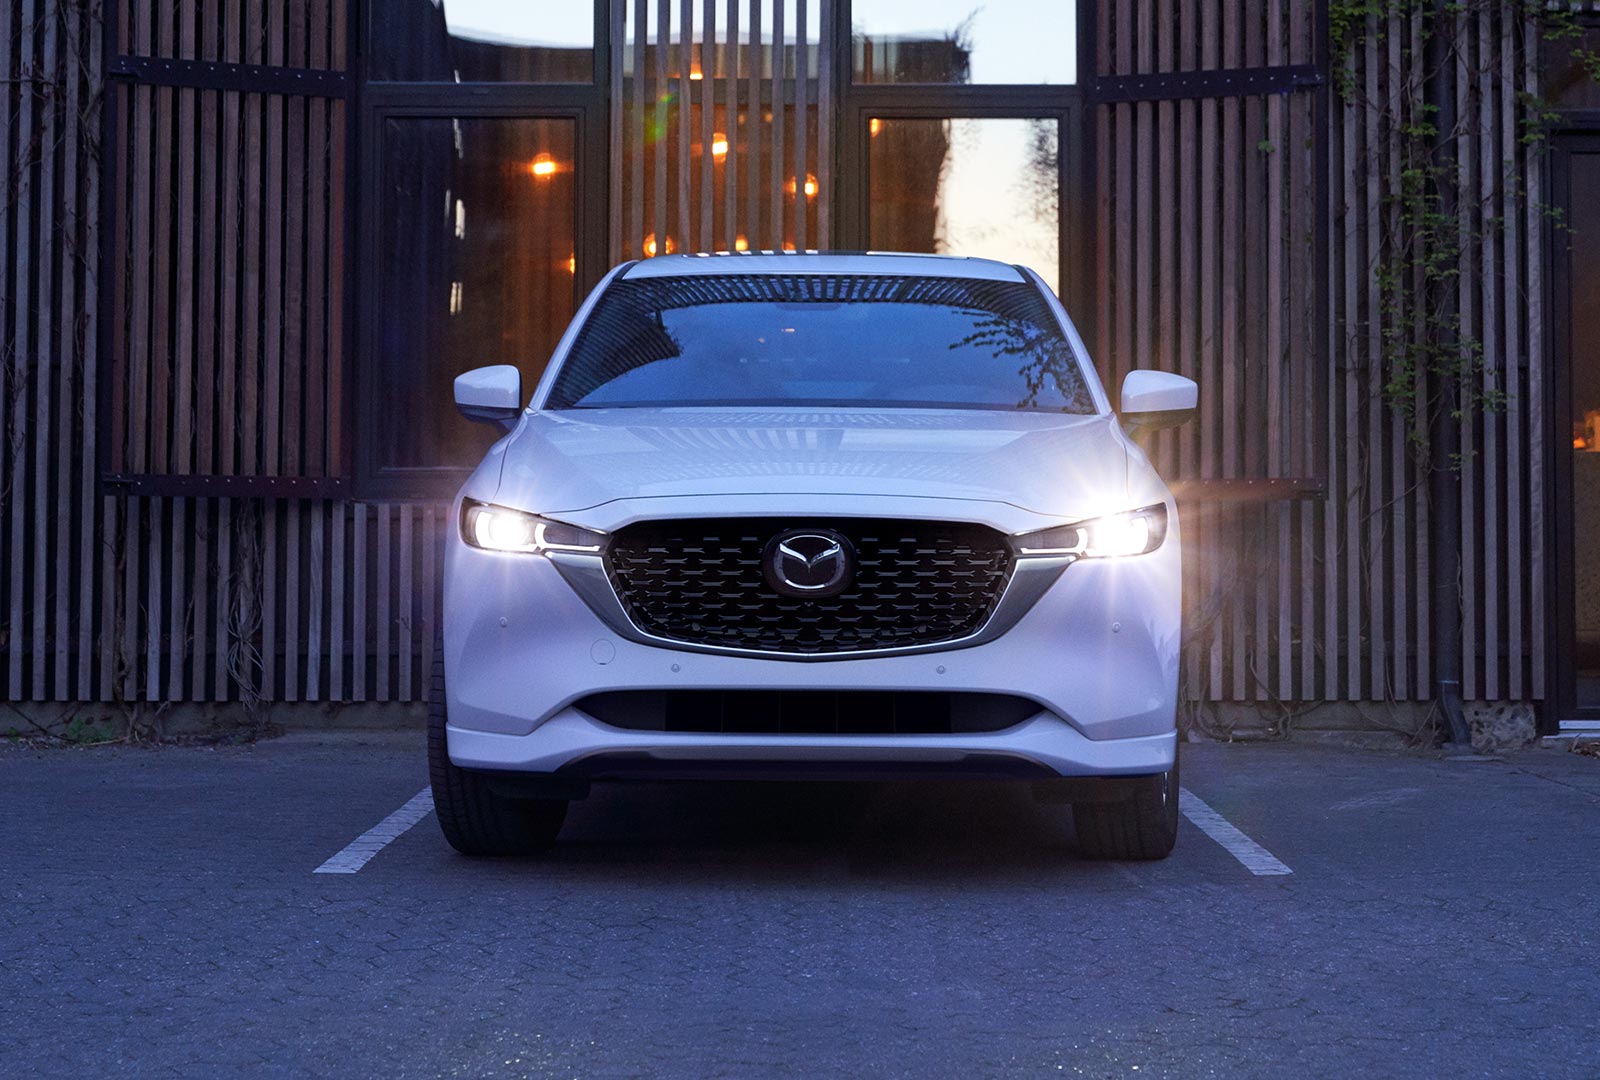 Front view of Snowflake White Pearl CX-5 parked in shade.